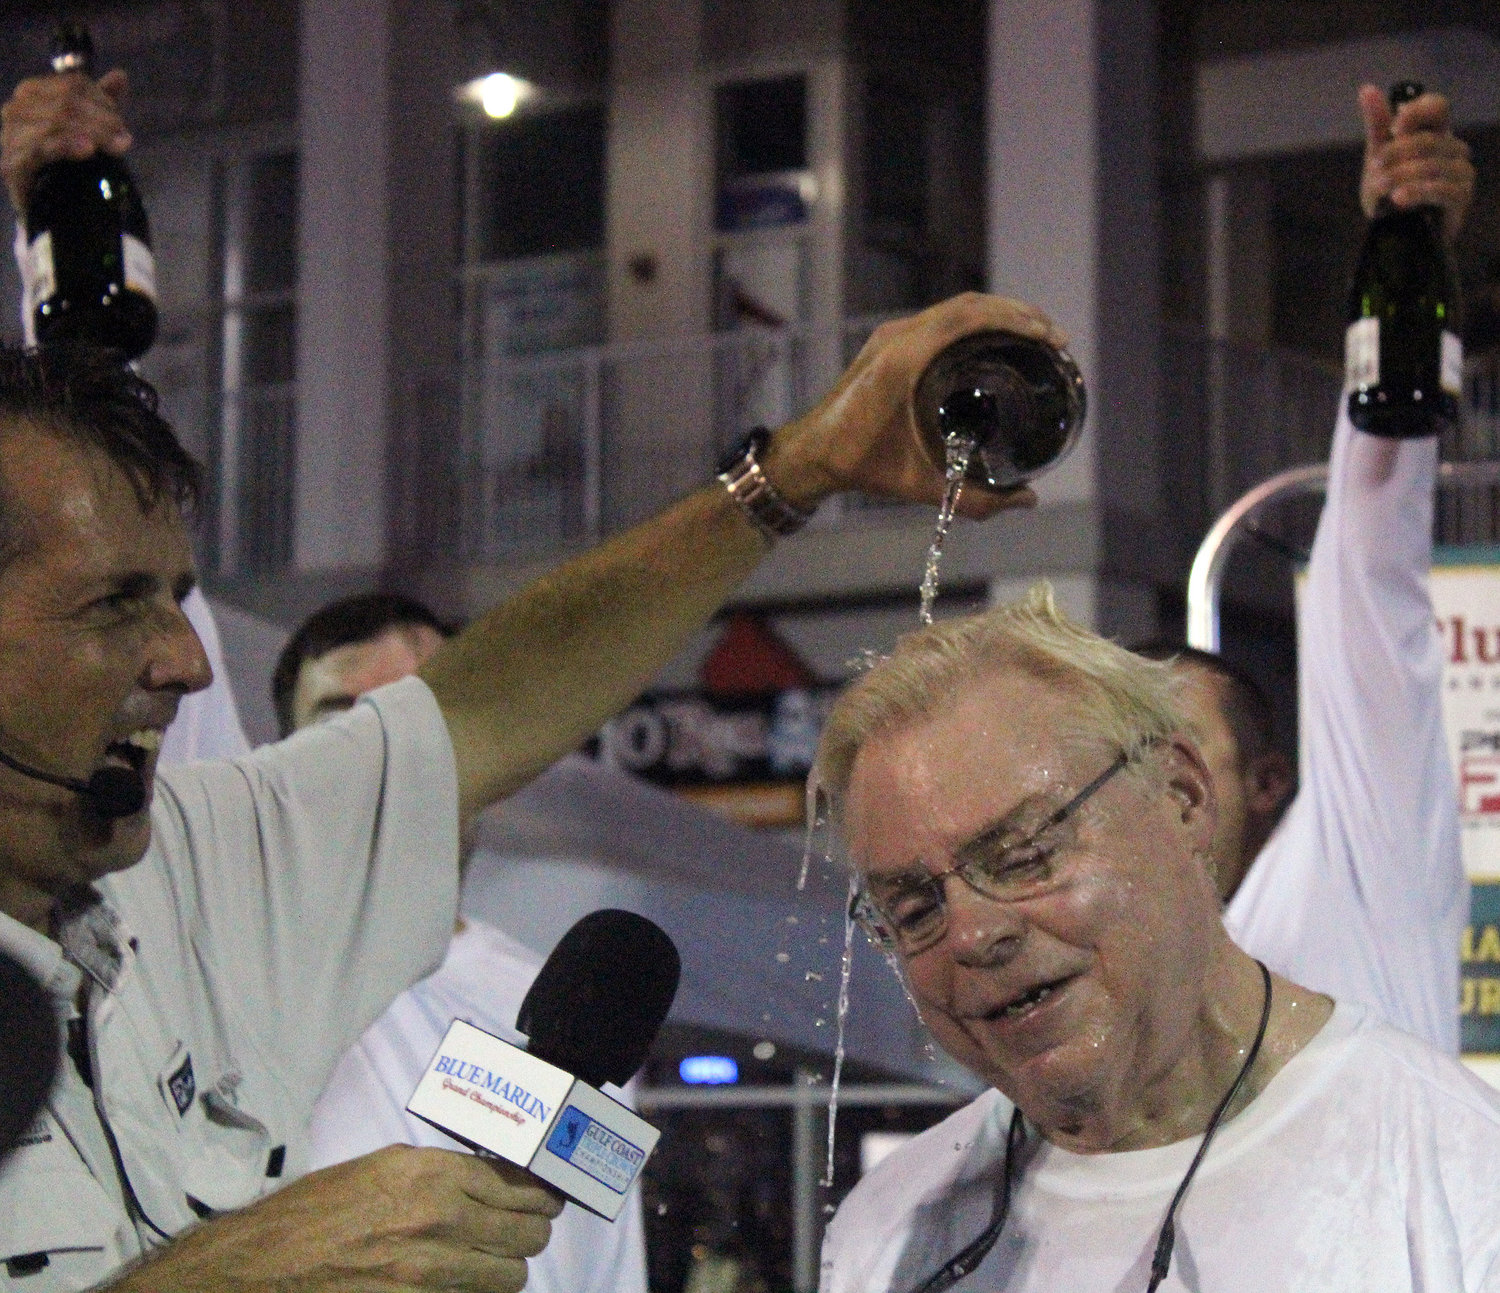 Blue Marlin Grand Championship host Jim Cox shares his champagne with A Work Of Art Owner Art Favre after his boat won the Gulf Coast Triple Crown at The Wharf last Saturday night, July 23.